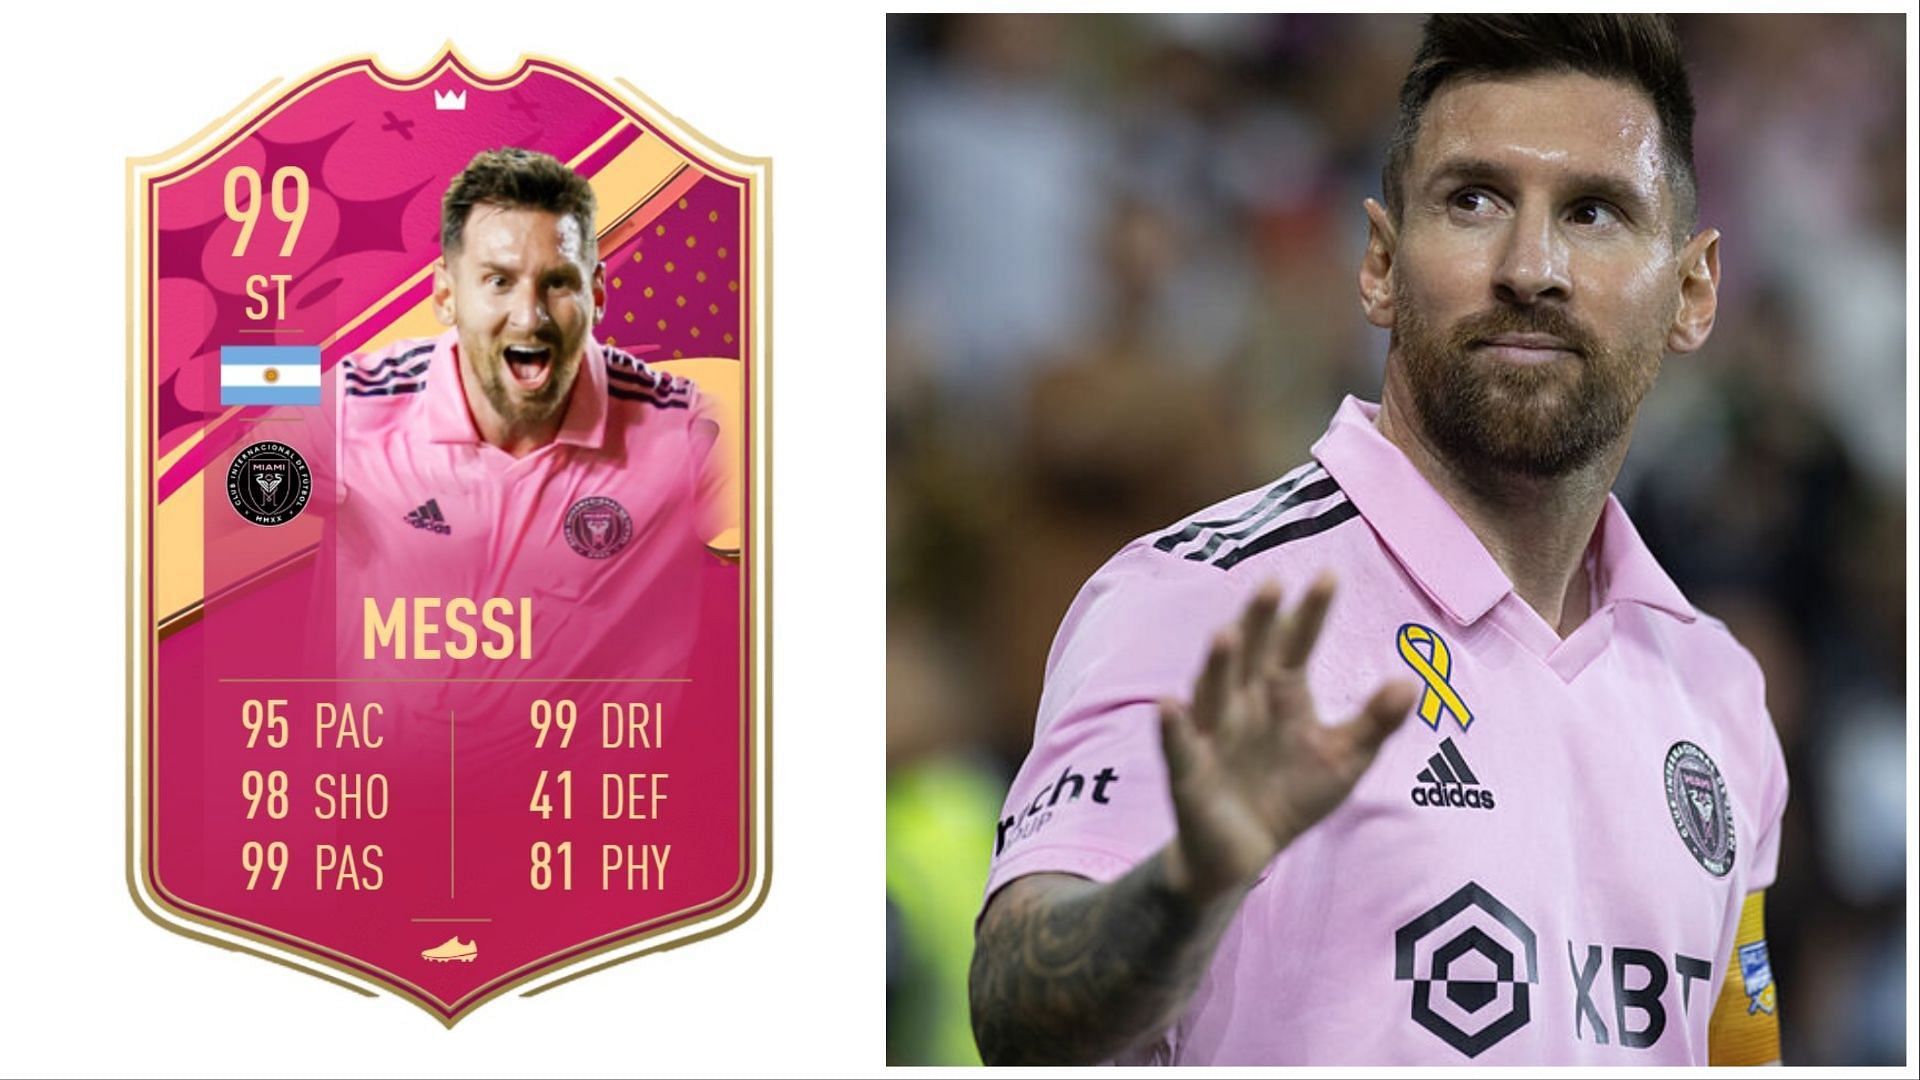 FUTTIES Messi SBC is now live (Images via EA Sports and Getty)